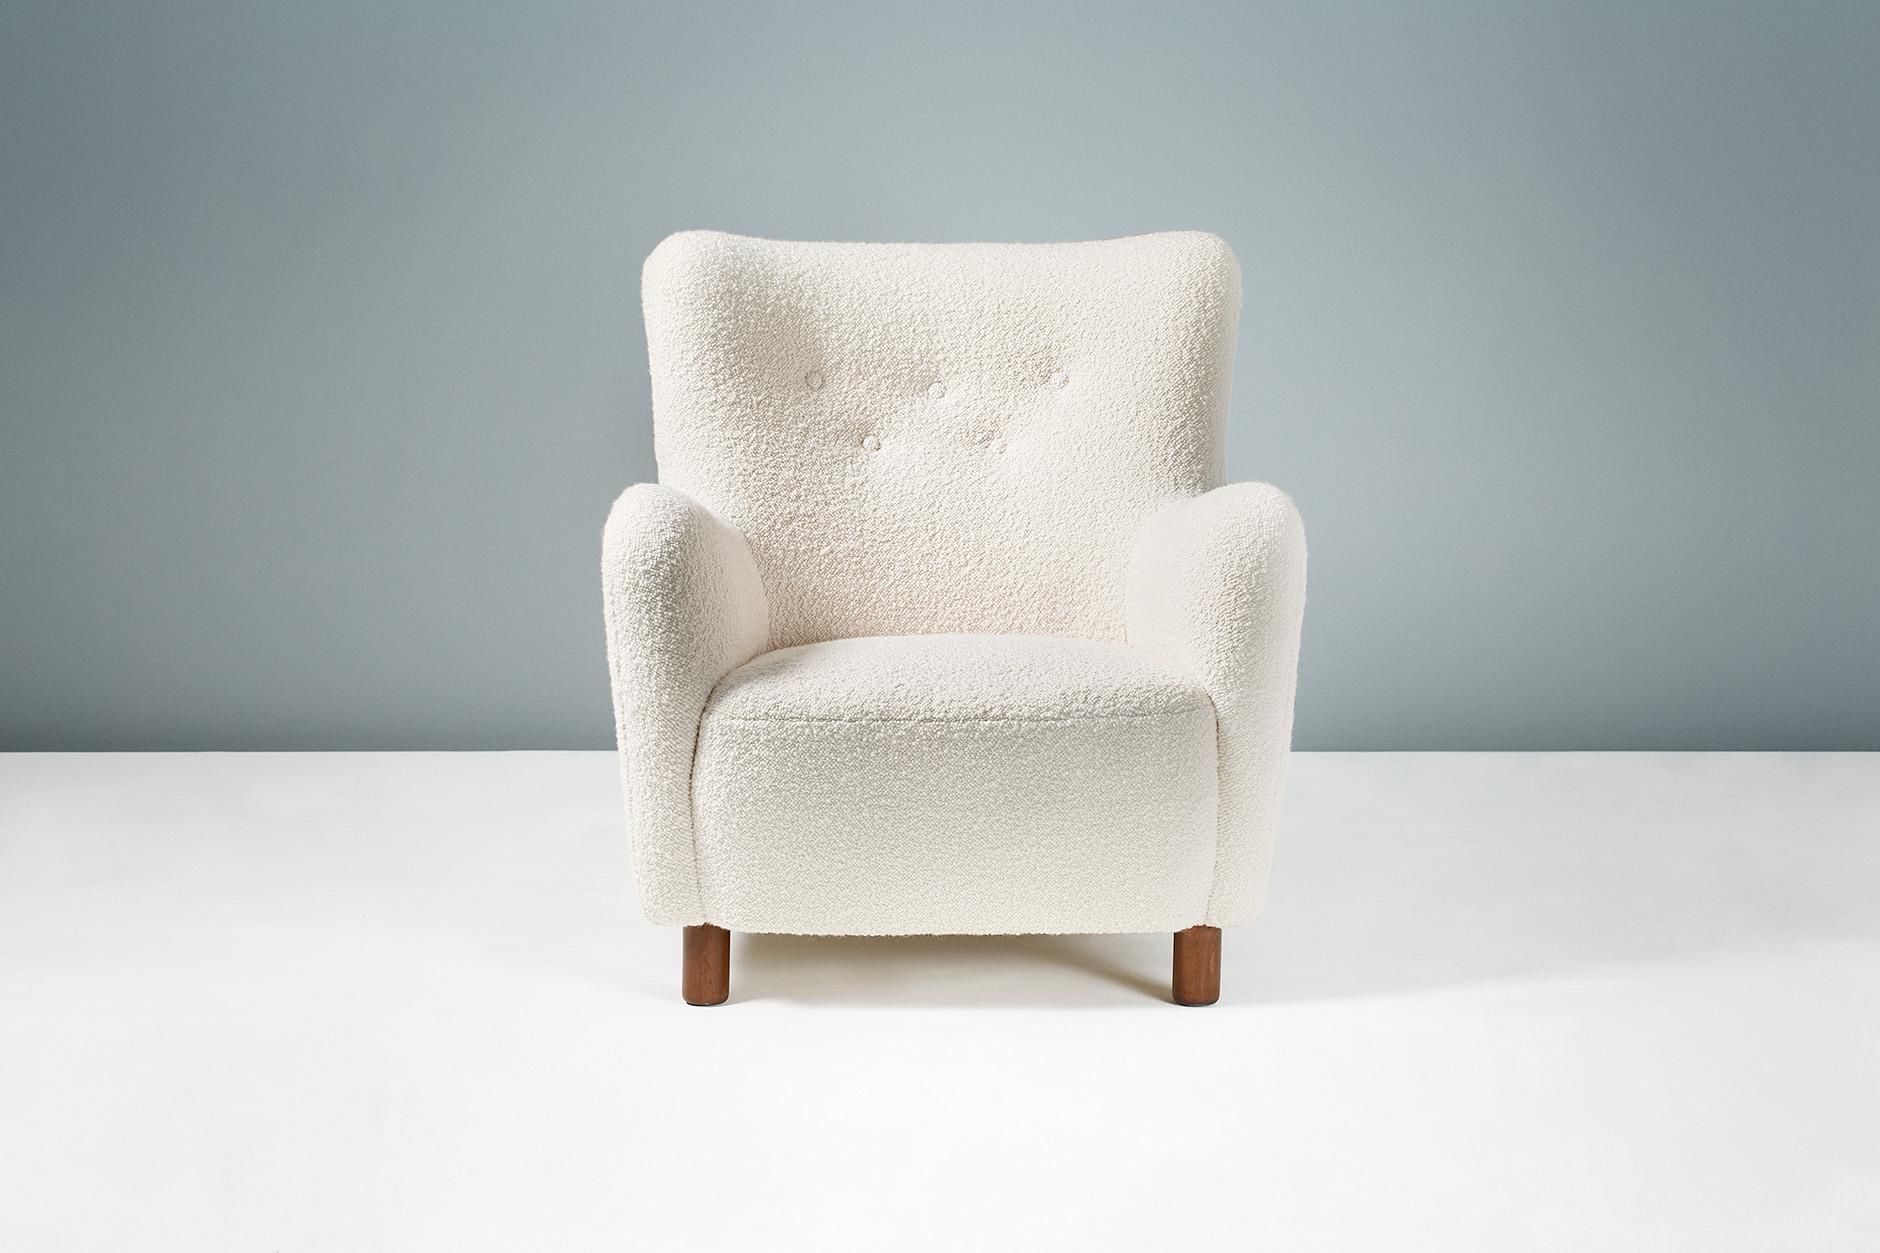 Dagmar Design

Model 54 Lounge Chair

A pair of custom made lounge chairs developed and produced at our workshops in London using the highest quality materials. These examples are upholstered in luxurious cotton-wool blend off-white bouclé fabric